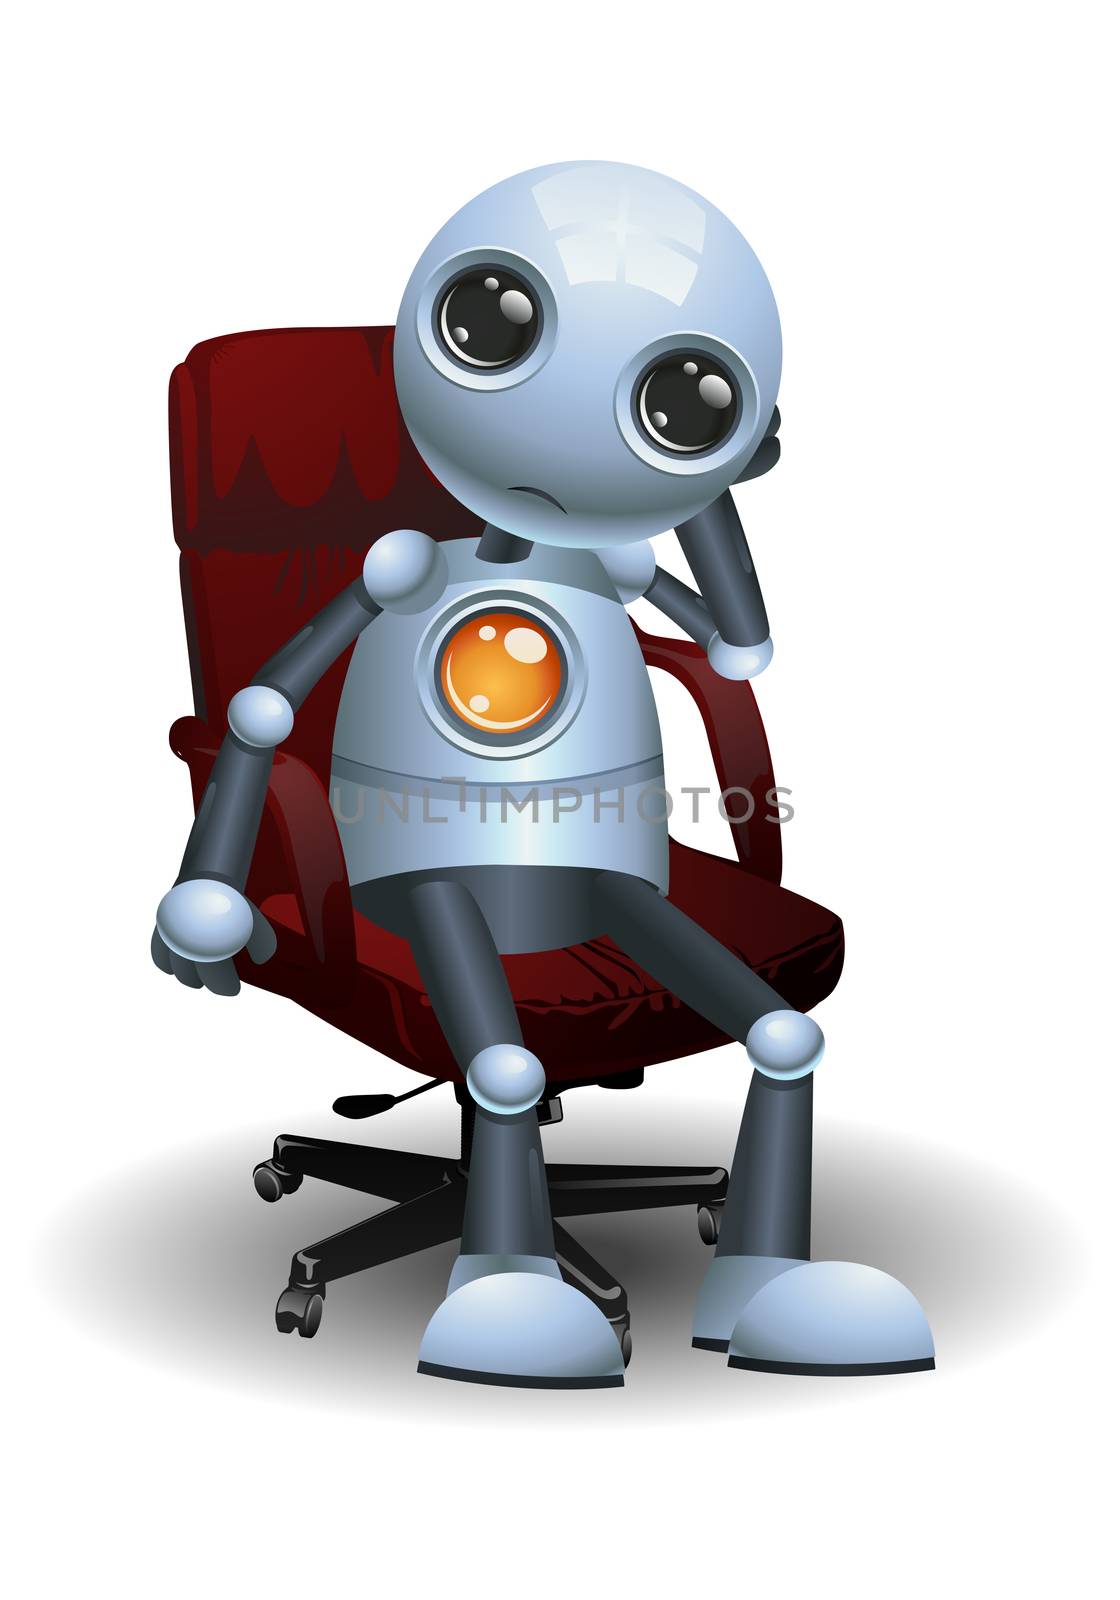 illustration of a little robot sit on director chair on isolated white background